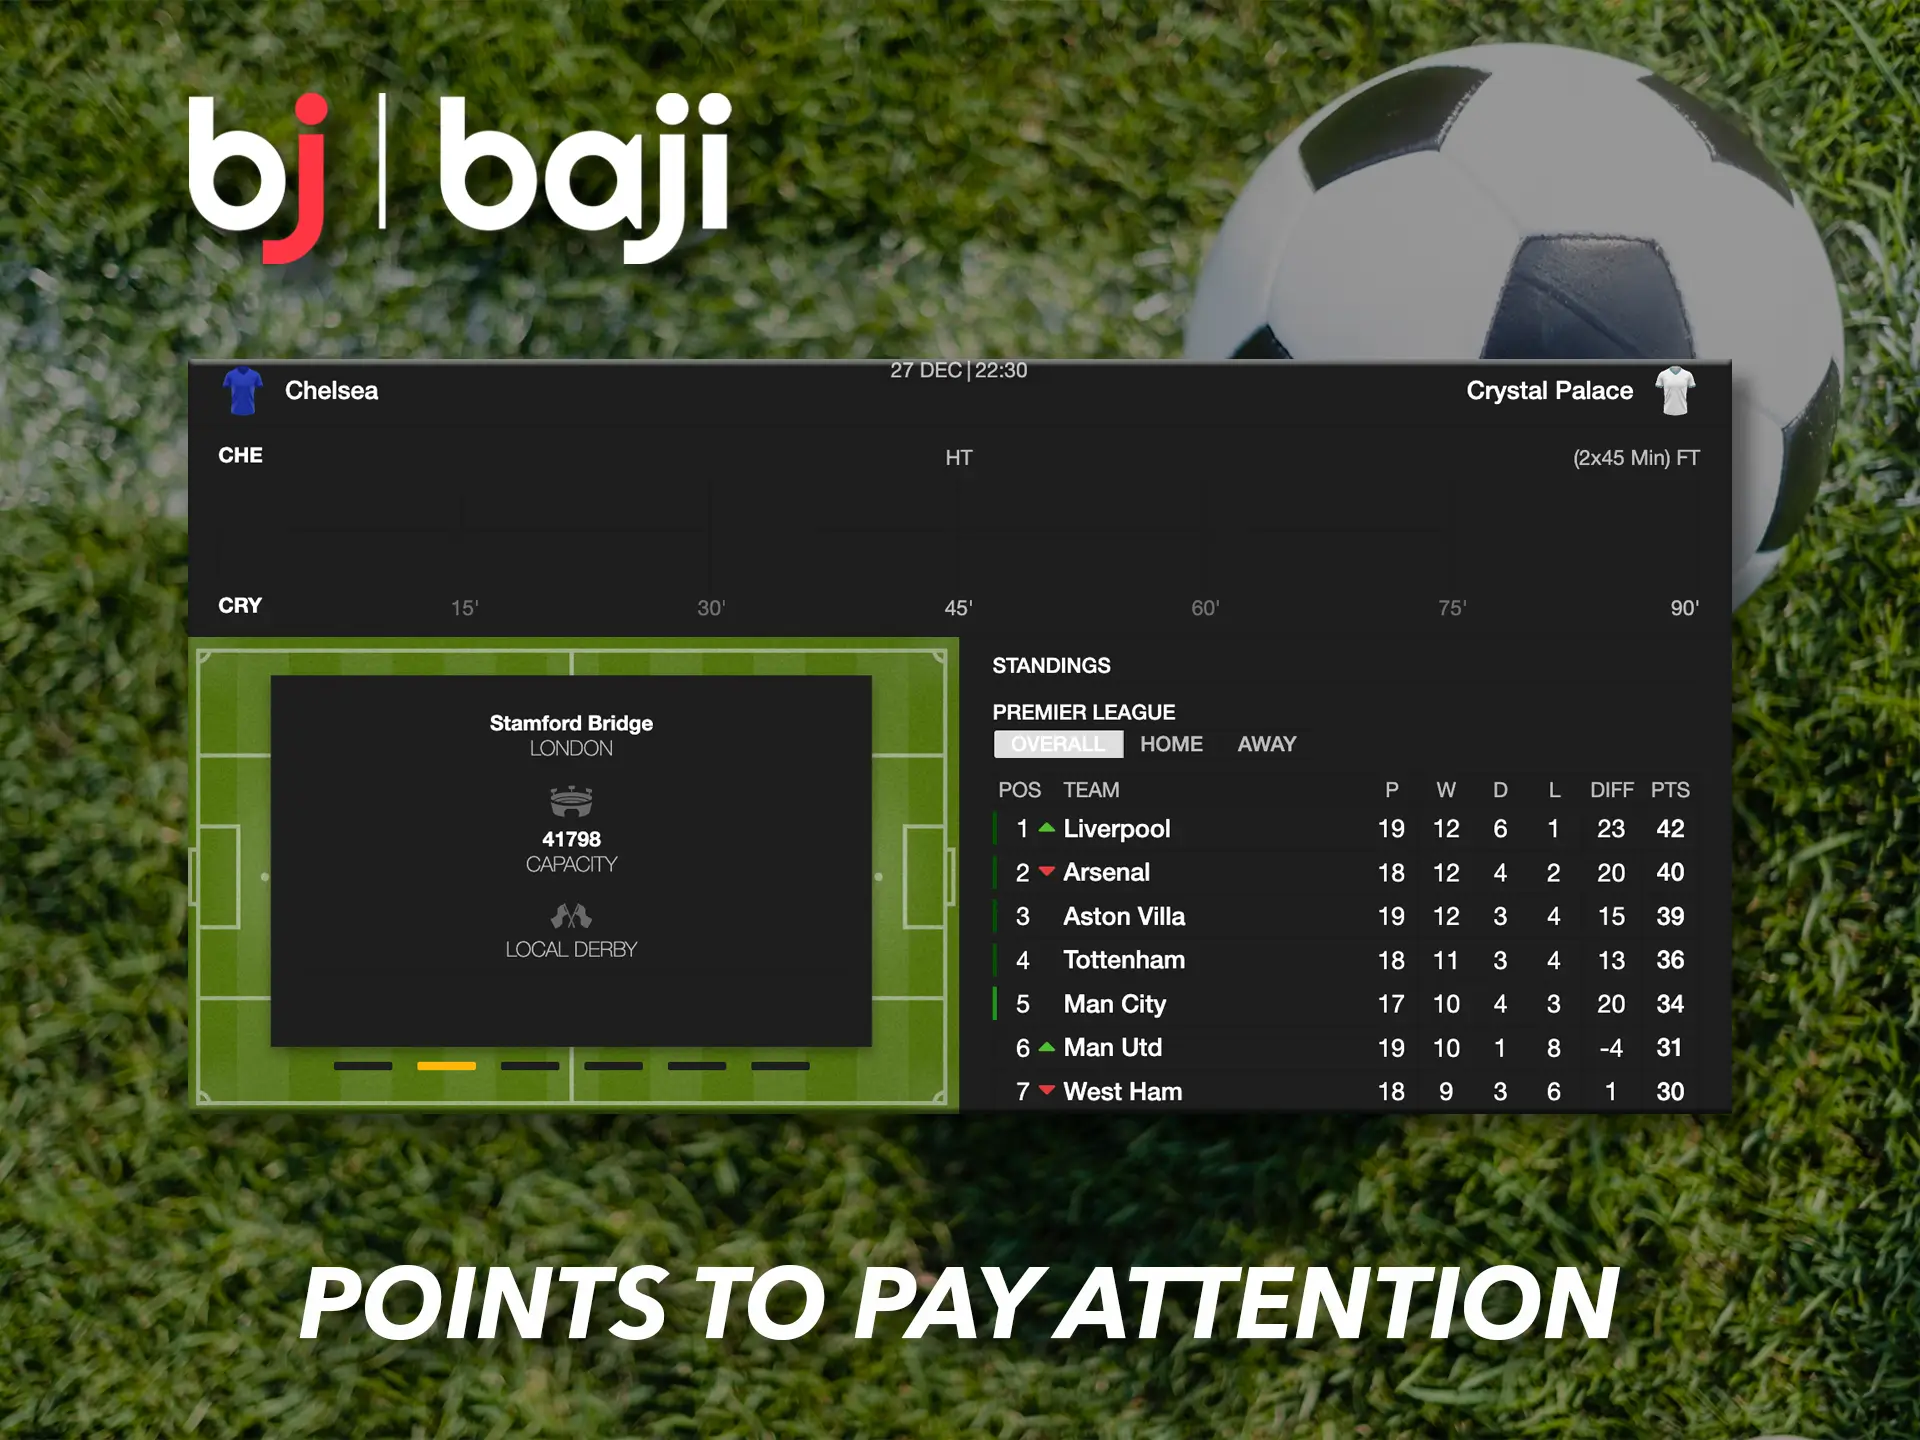 Pay attention to the pre-match statistics to make a correct prediction in Baji.